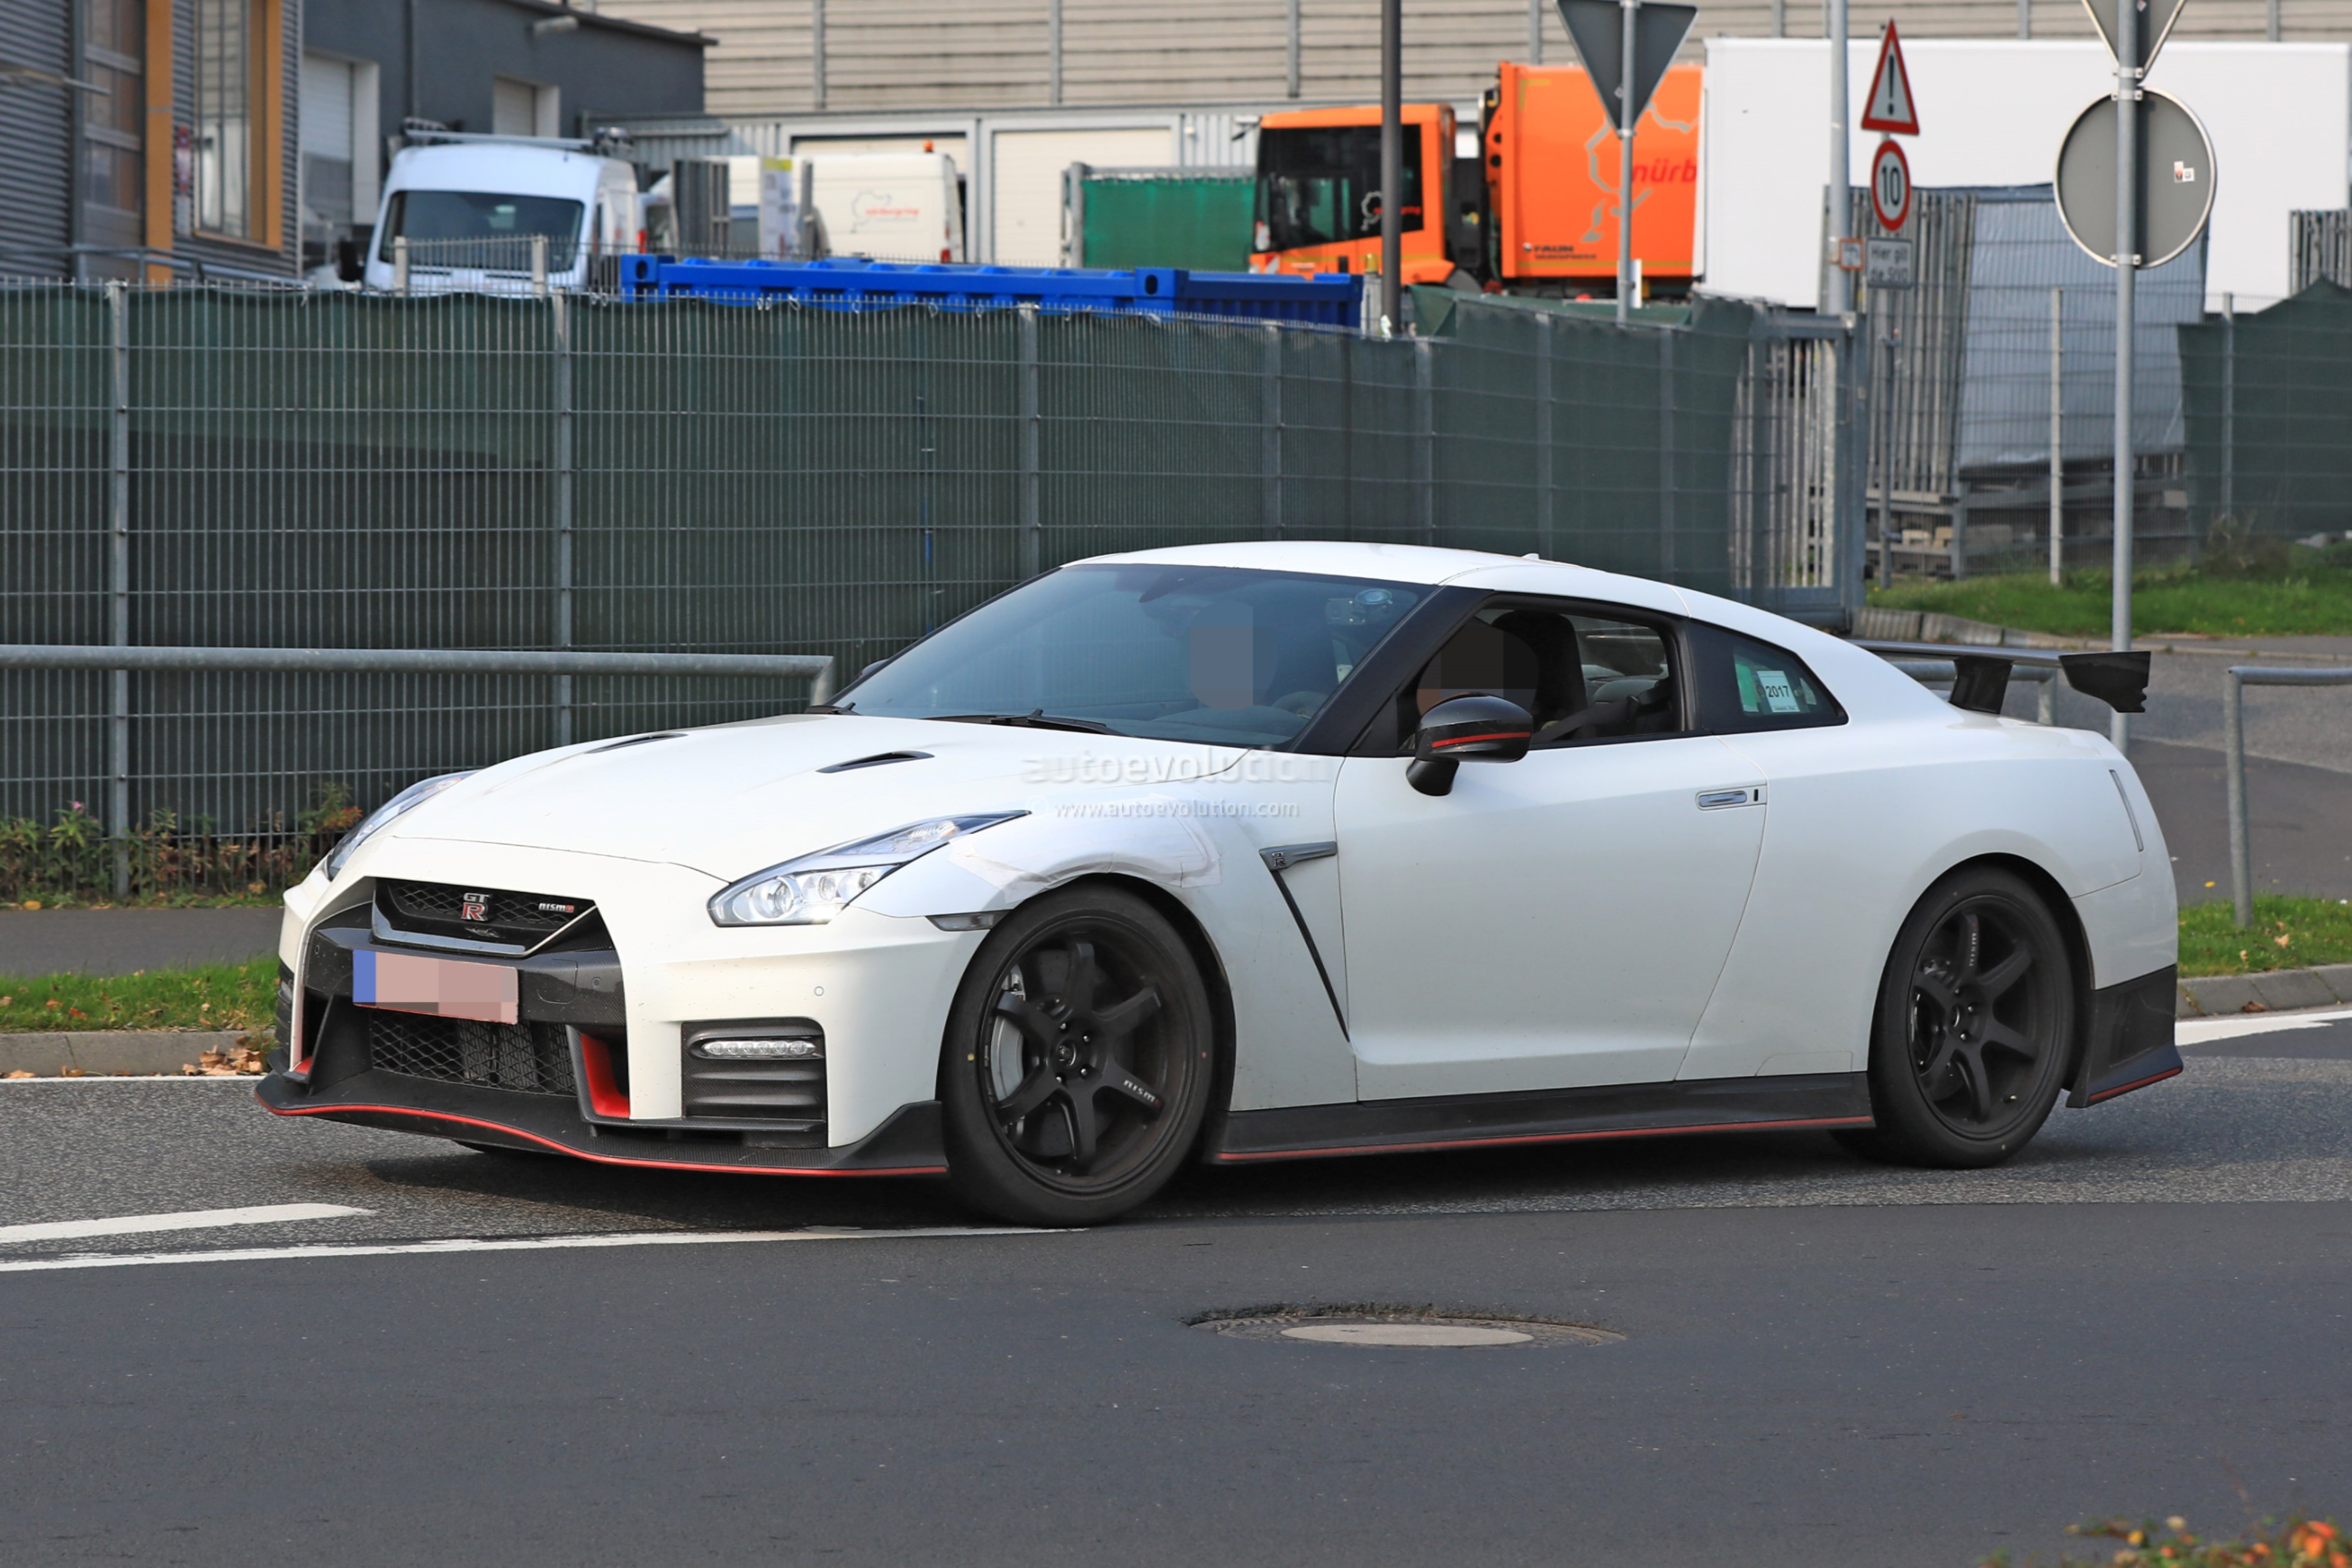 2018 Nissan GTR NISMO Spied With Different Brakes And